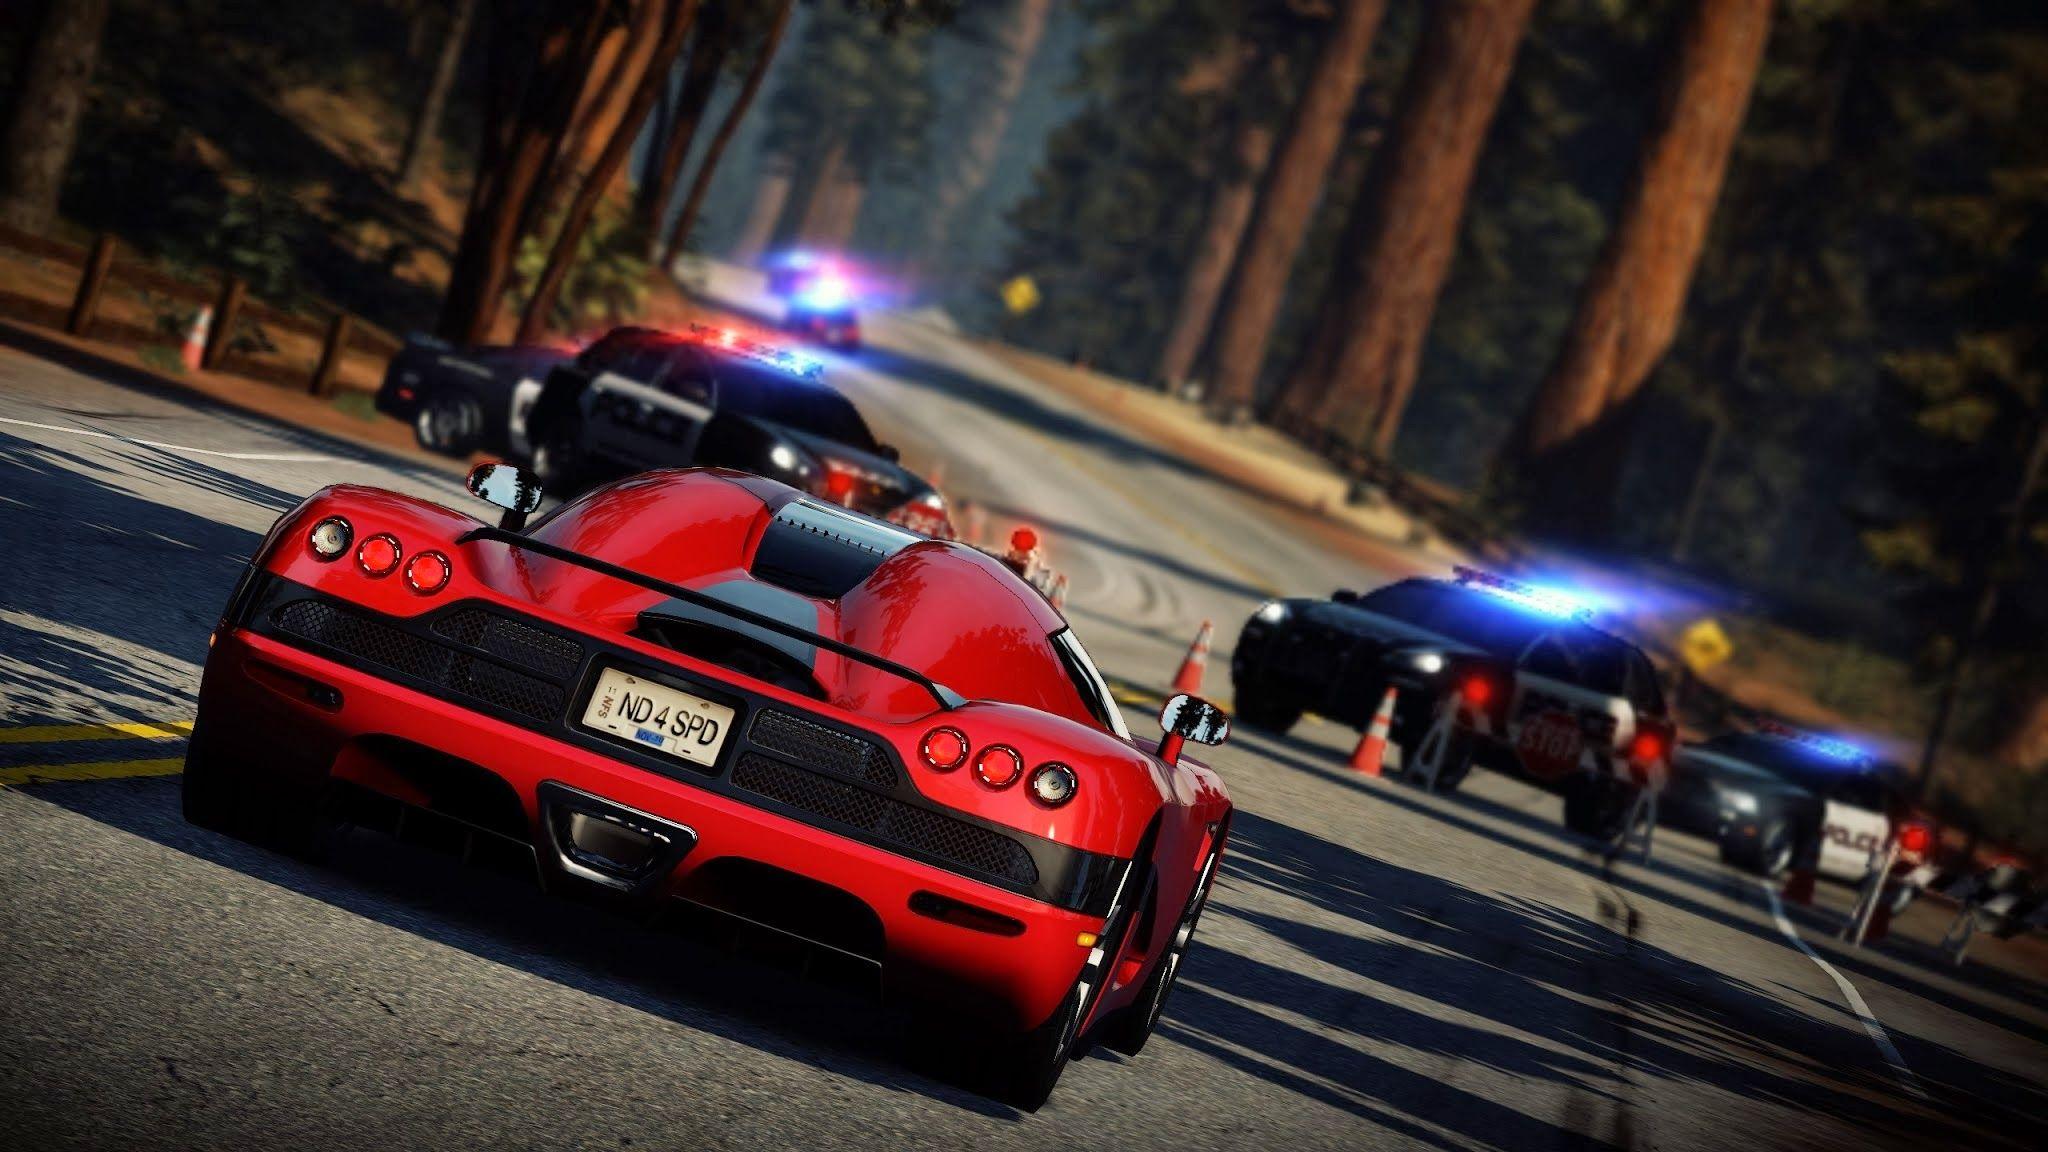 Widescreen Need For Speed HD Image Of Cars Wallpaper Pc Hot